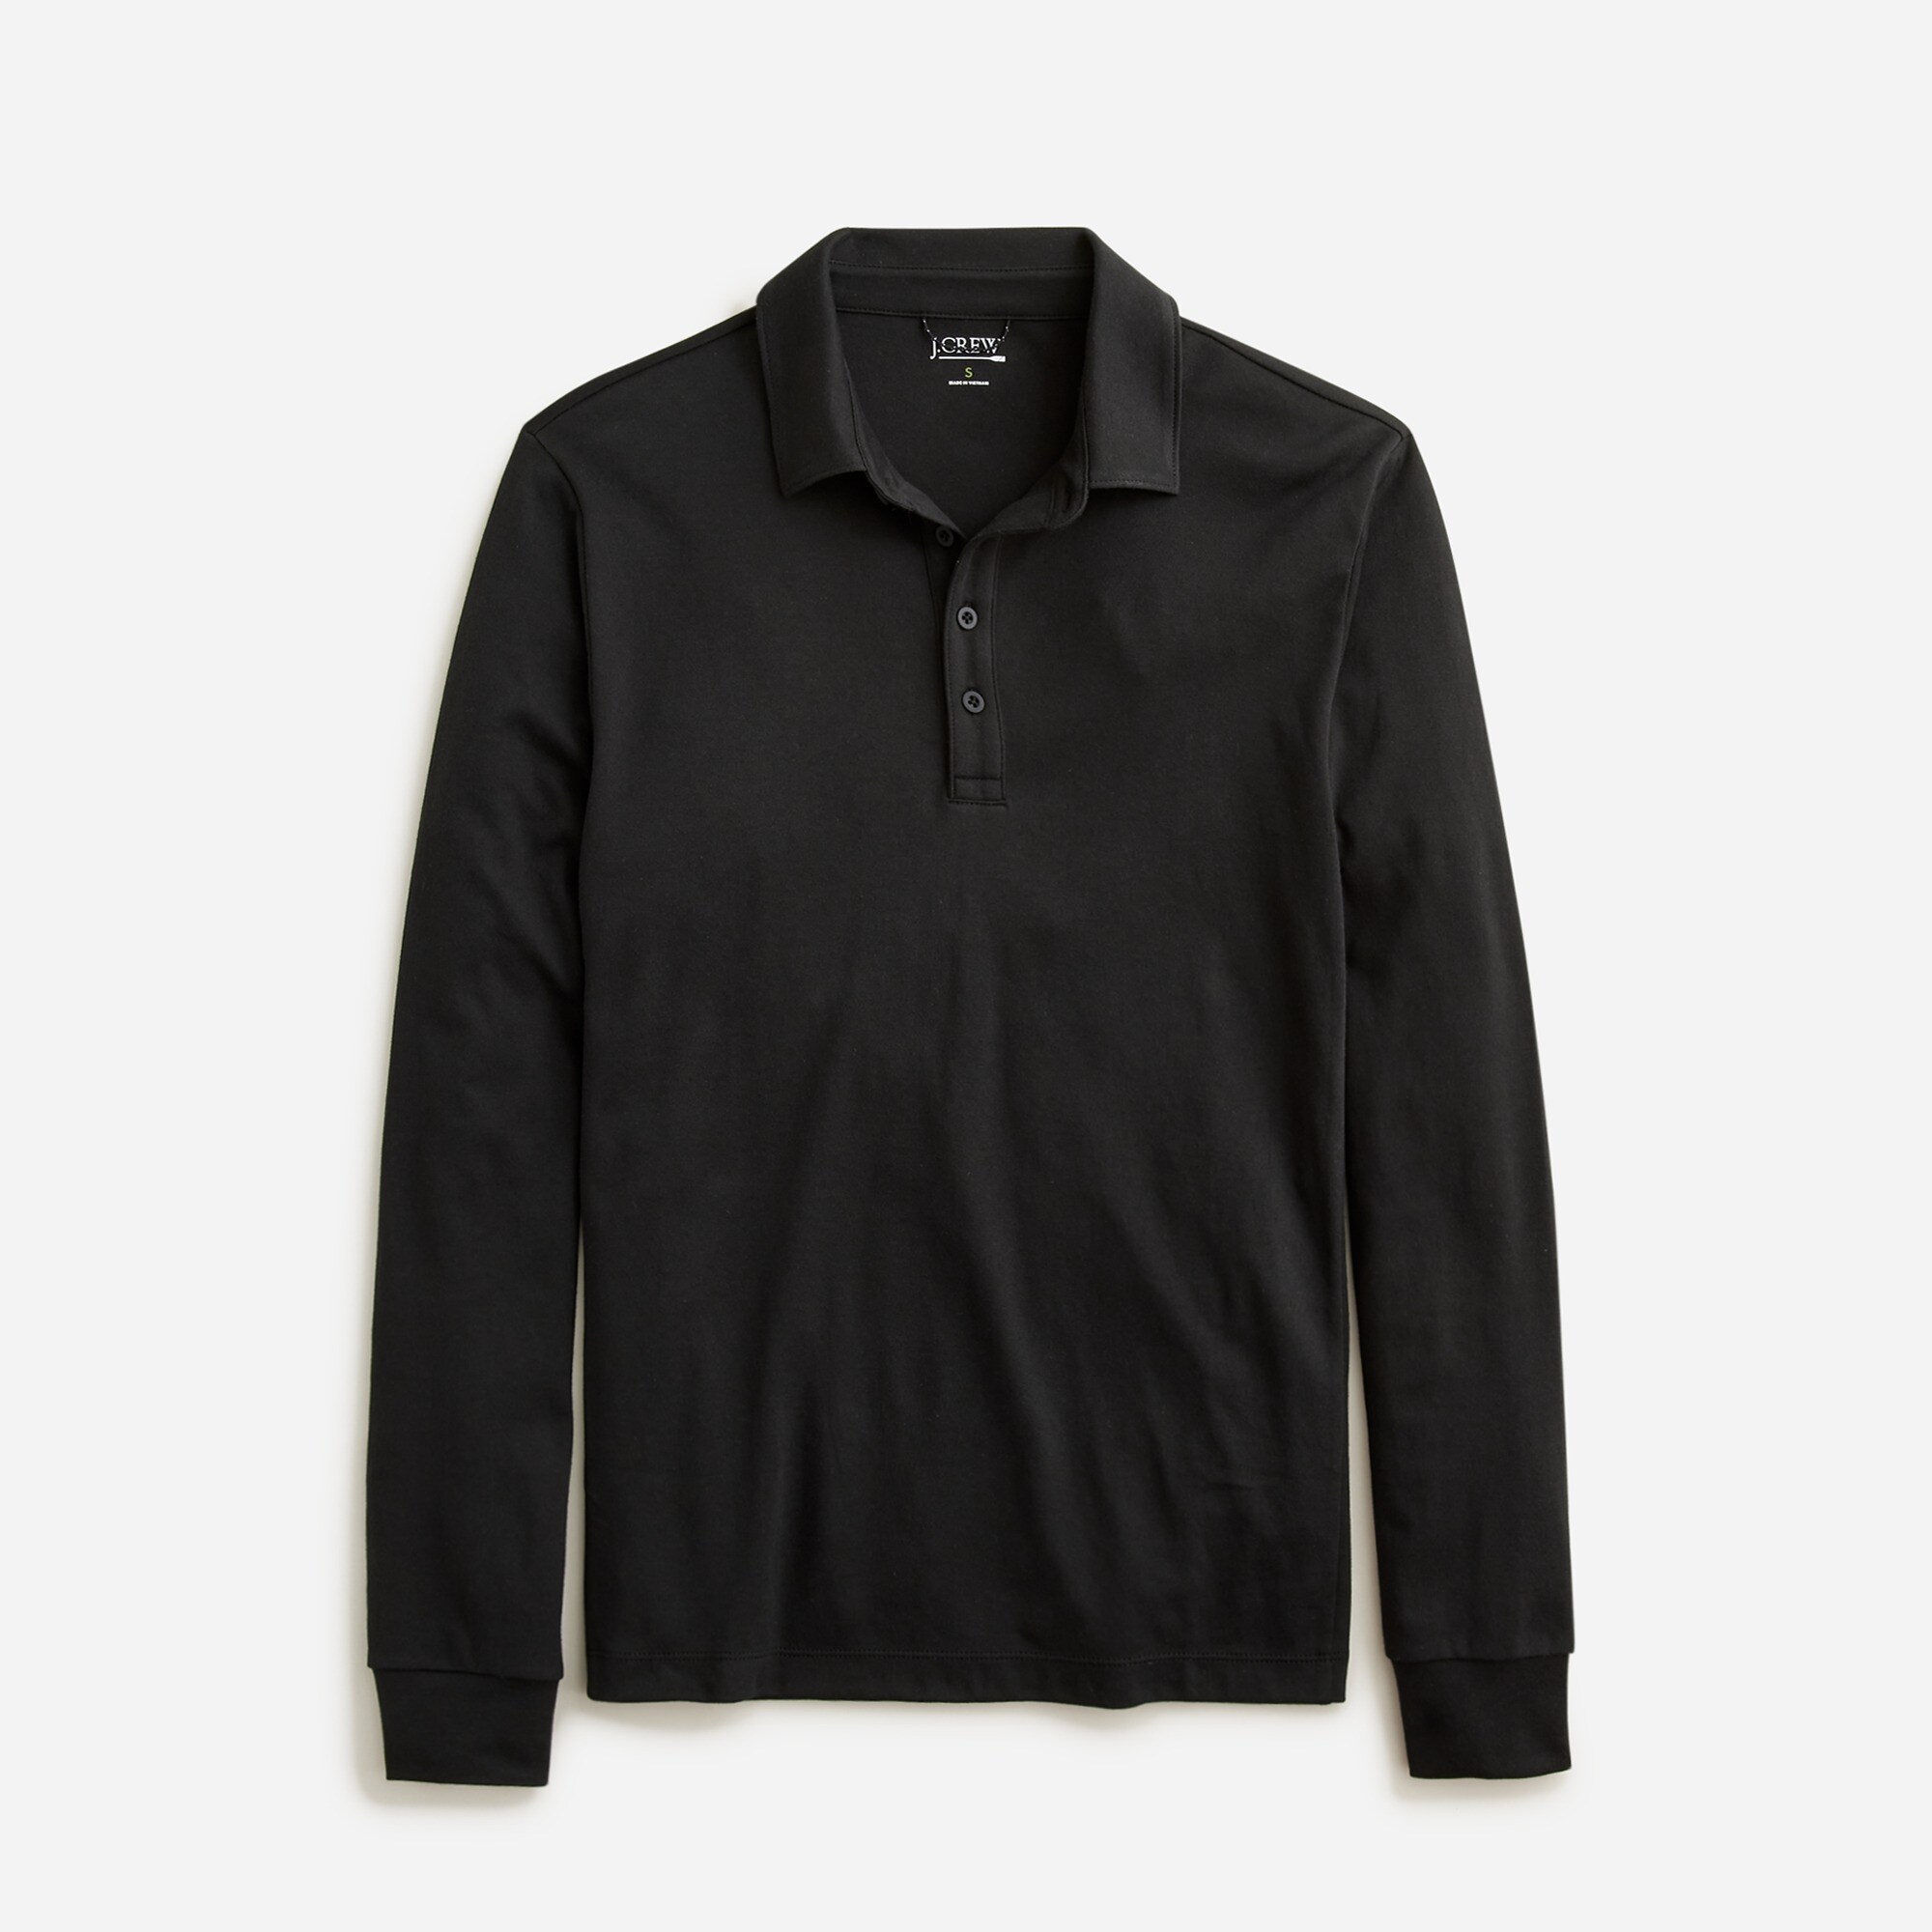  Classic Untucked long-sleeve performance polo shirt with COOLMAX&reg; technology